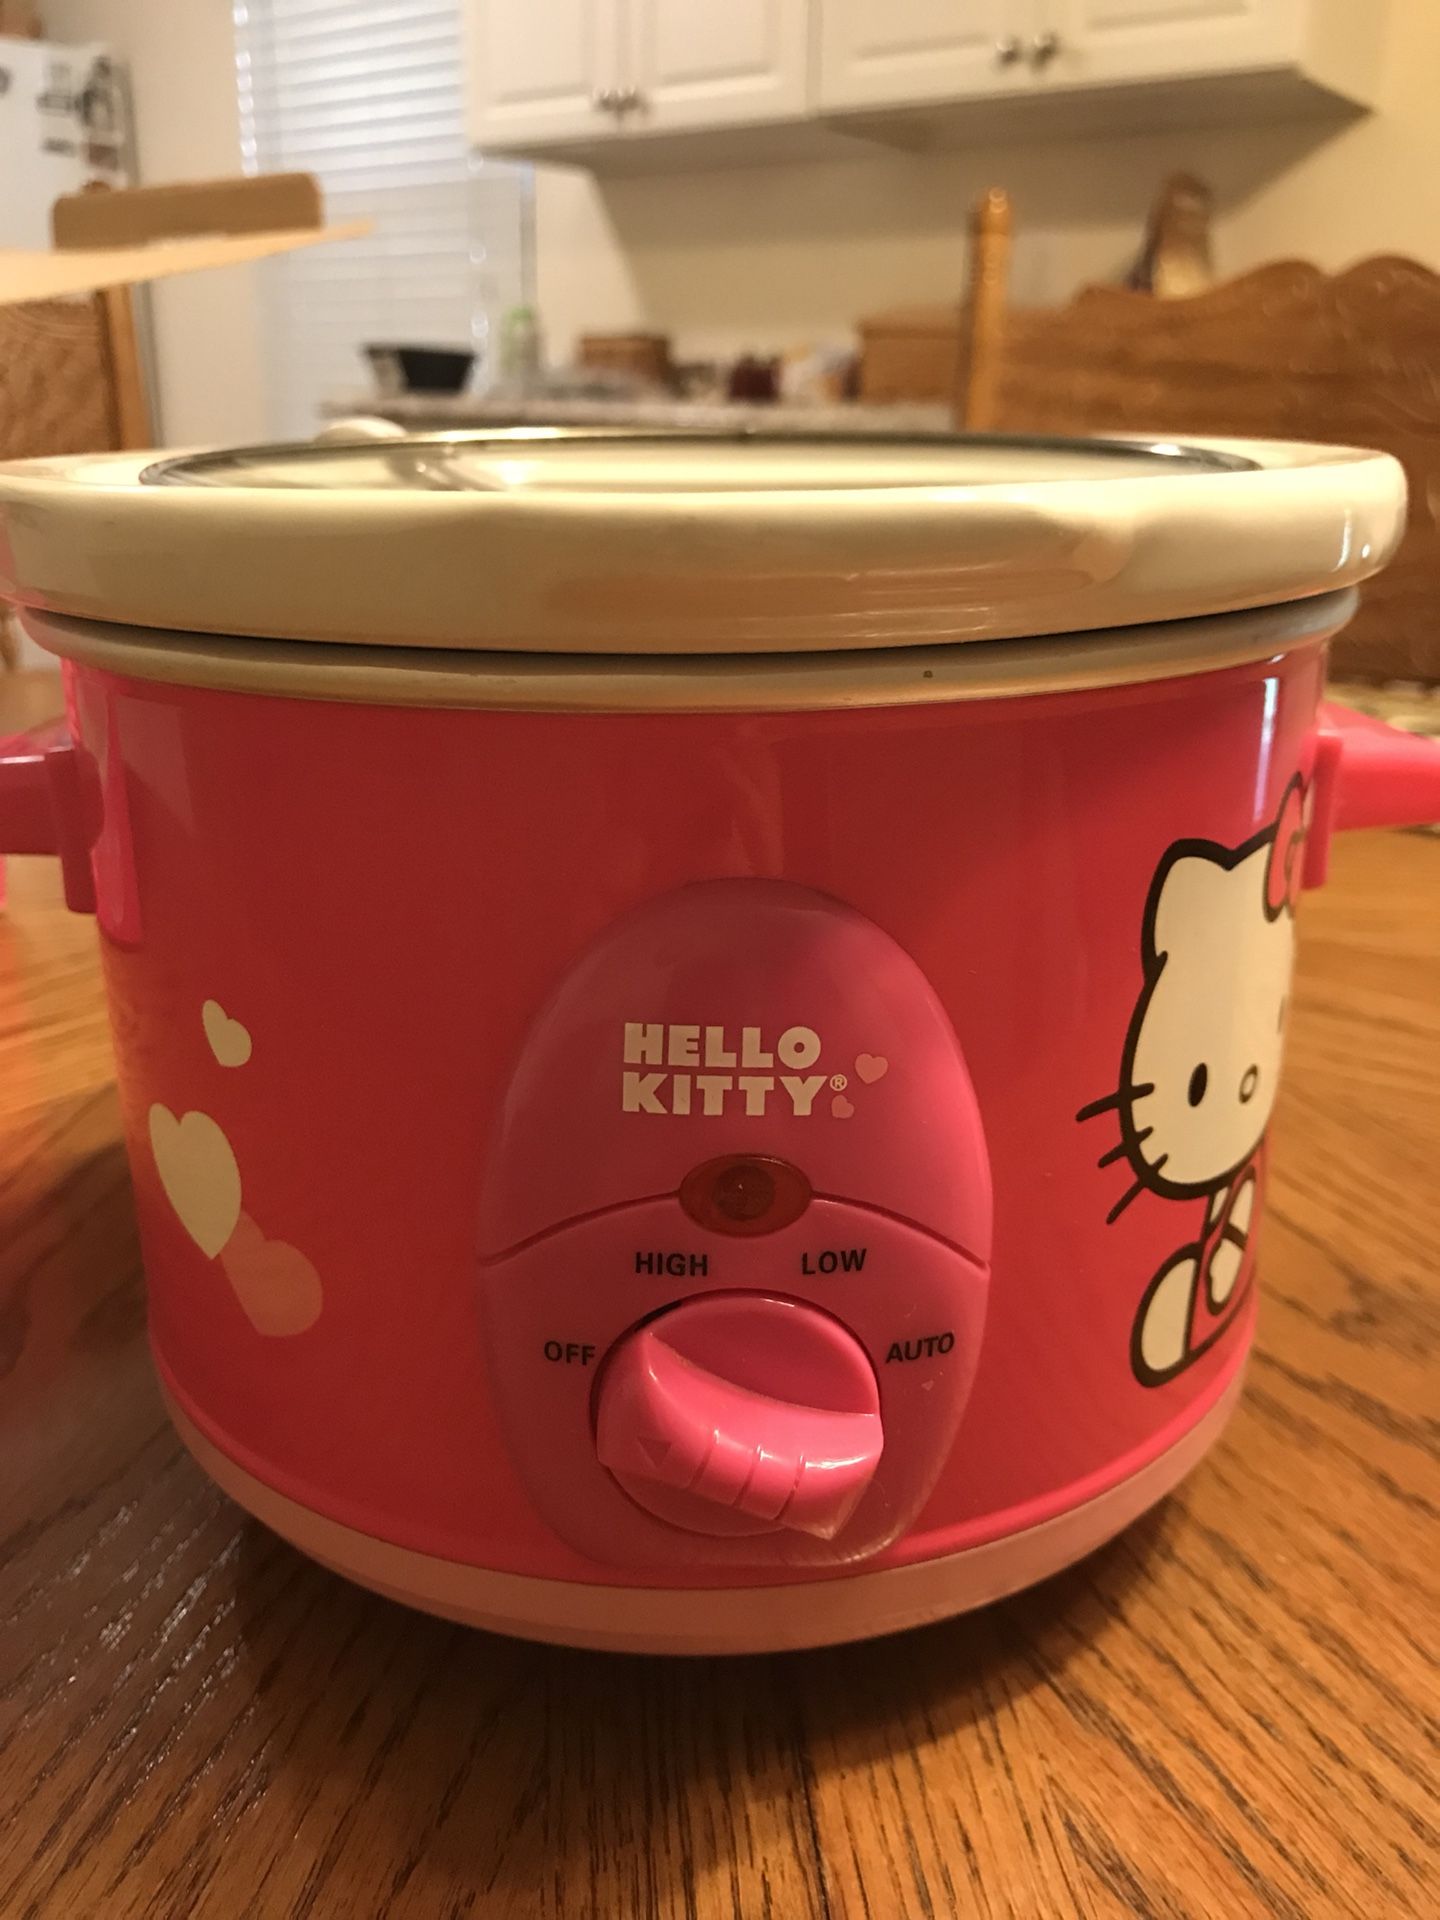 Hello Kitty Crock Pot Slow Cooker for Sale in Florence, KY - OfferUp